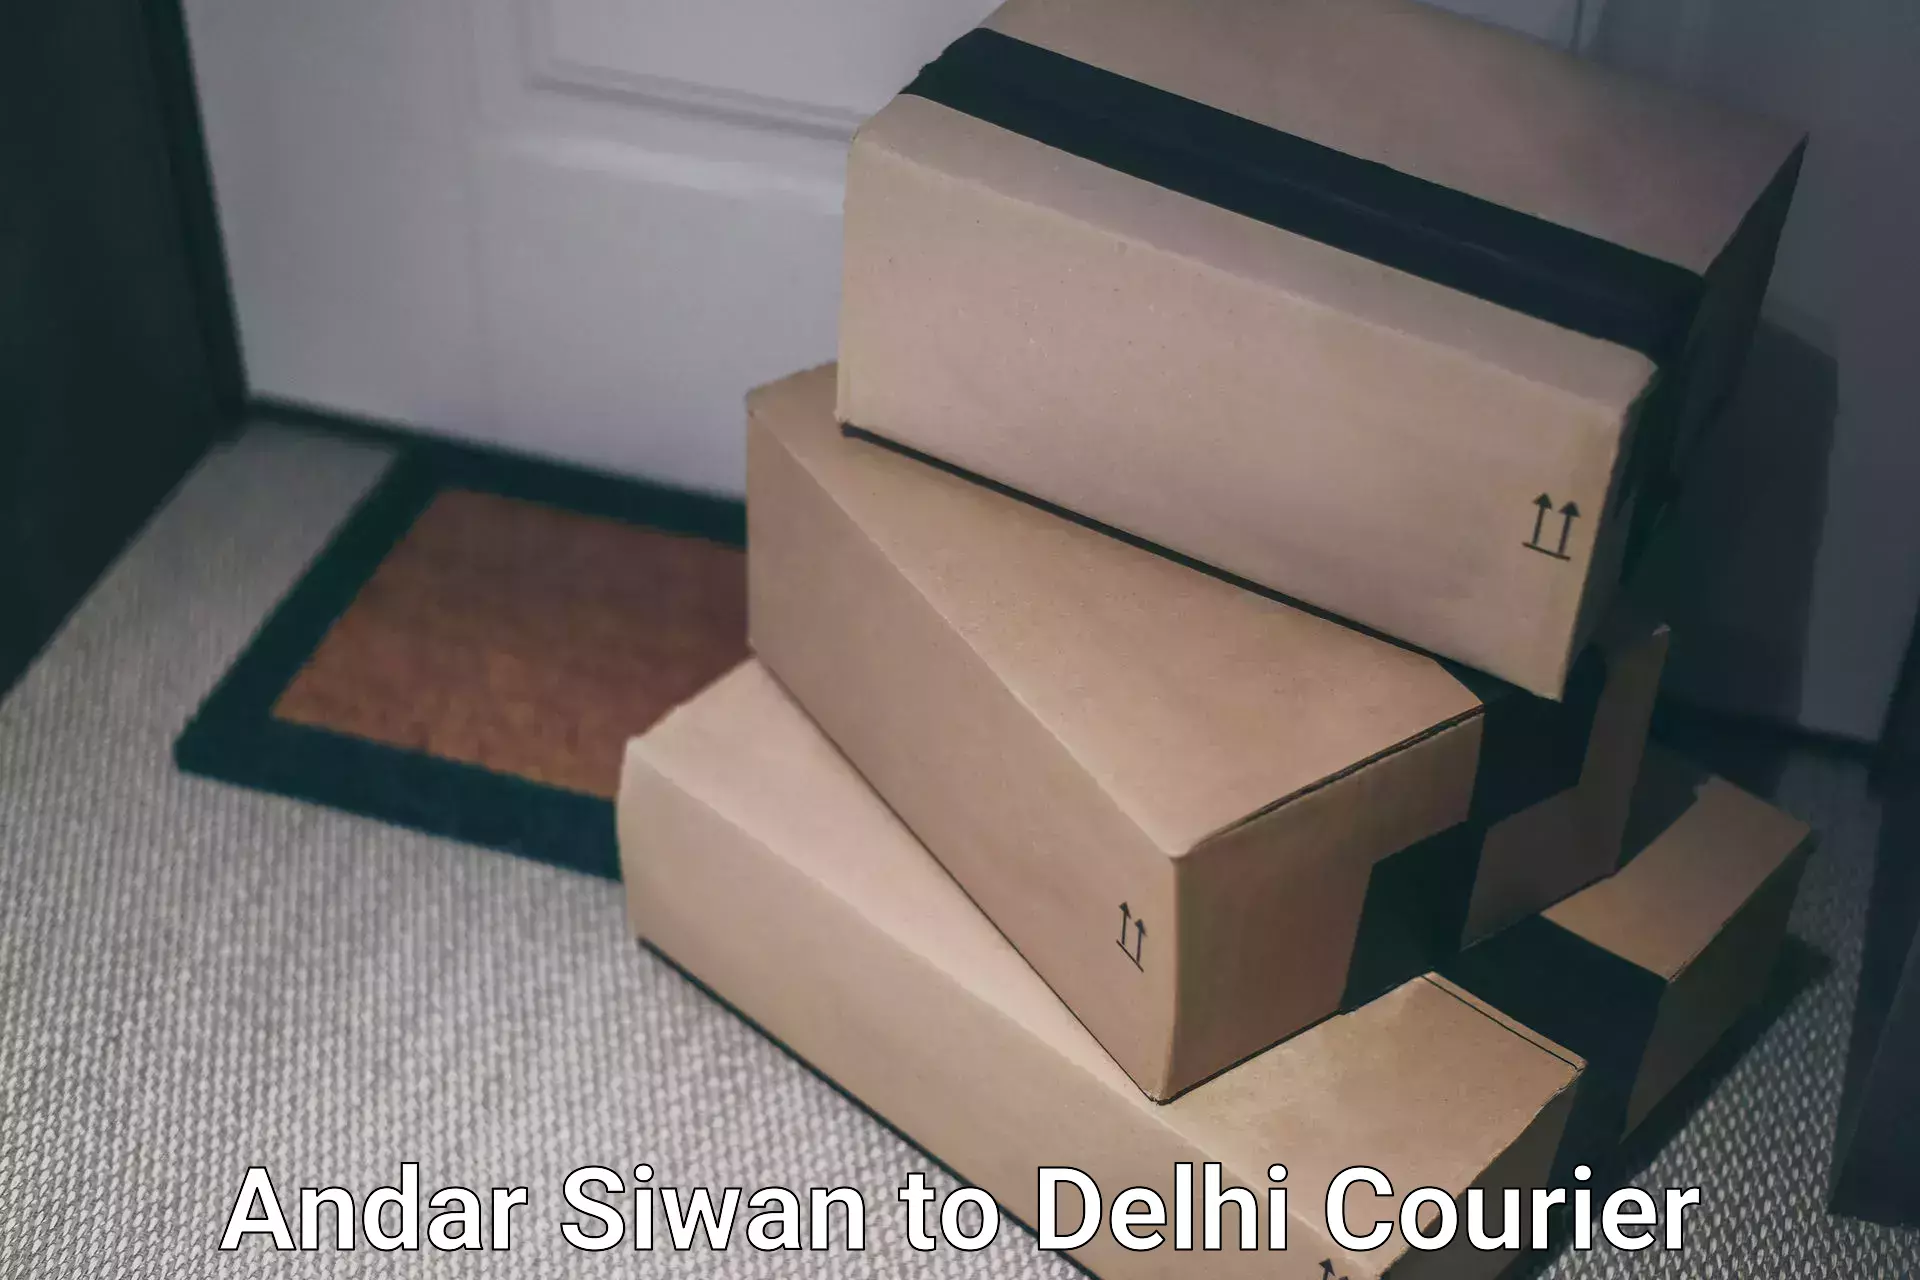 Reliable courier service Andar Siwan to Delhi